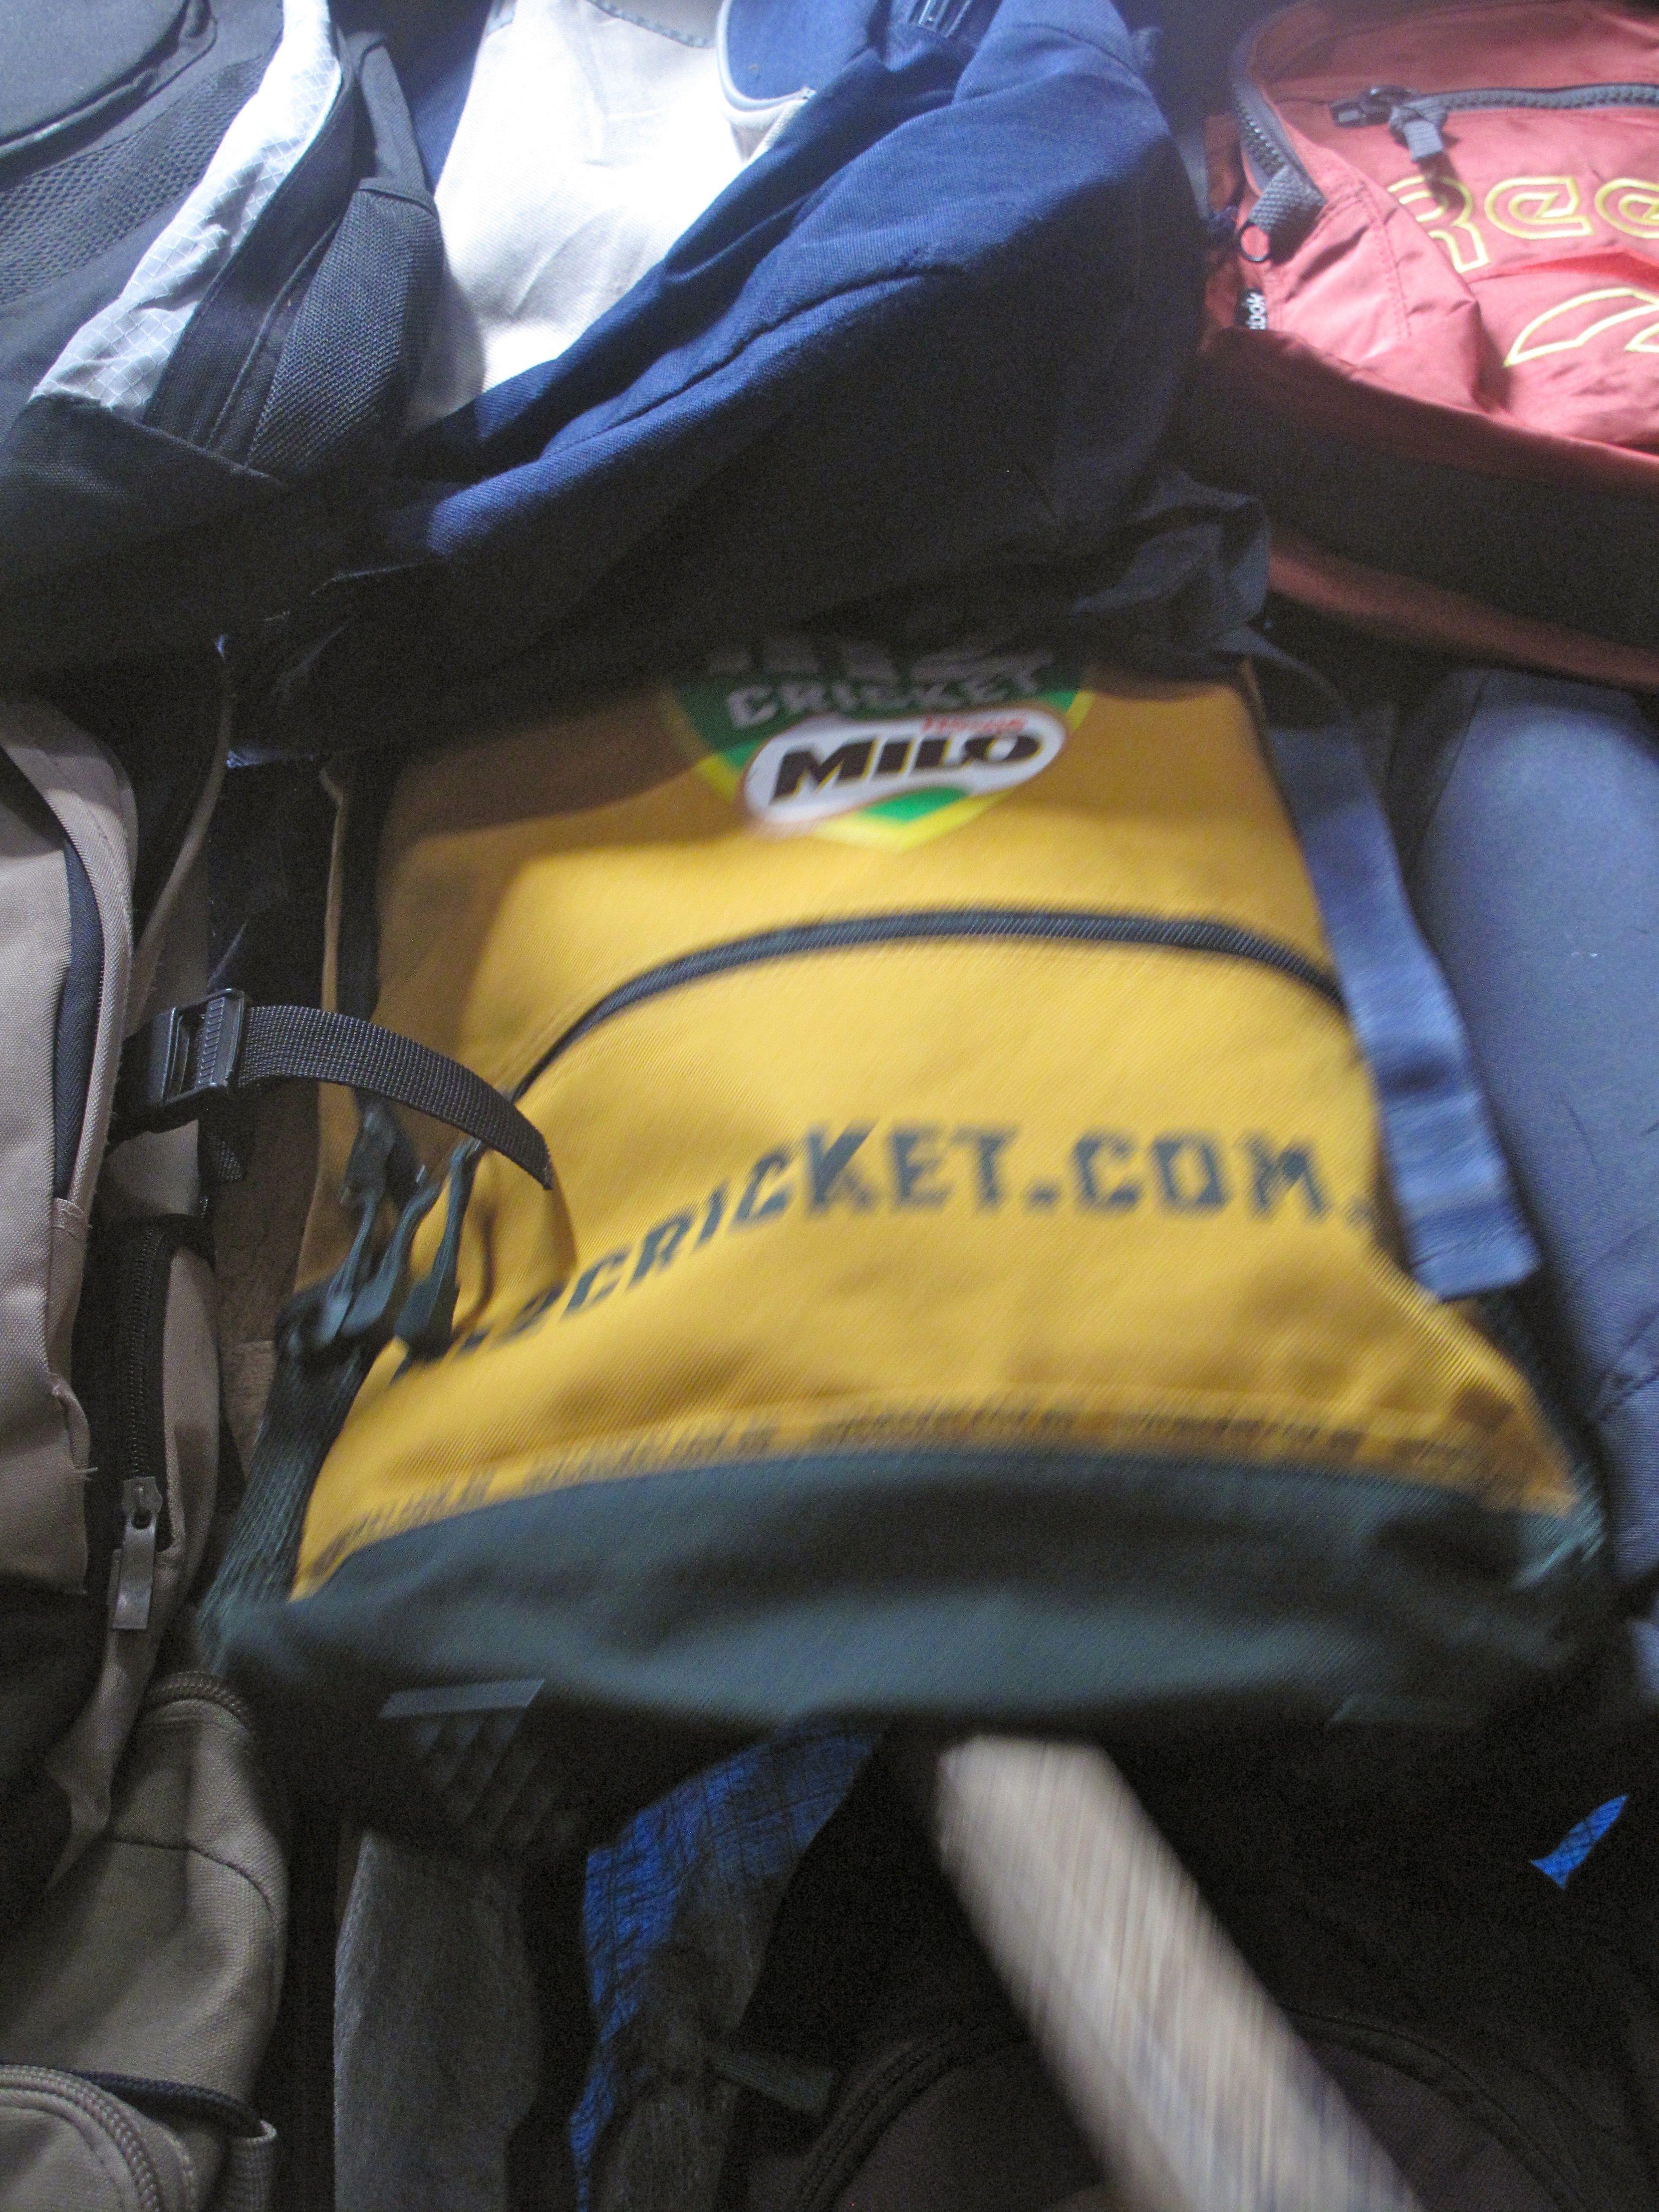 Australian Backpack Logo - But wait, there's more! An Australian cricket backpack with the Milo